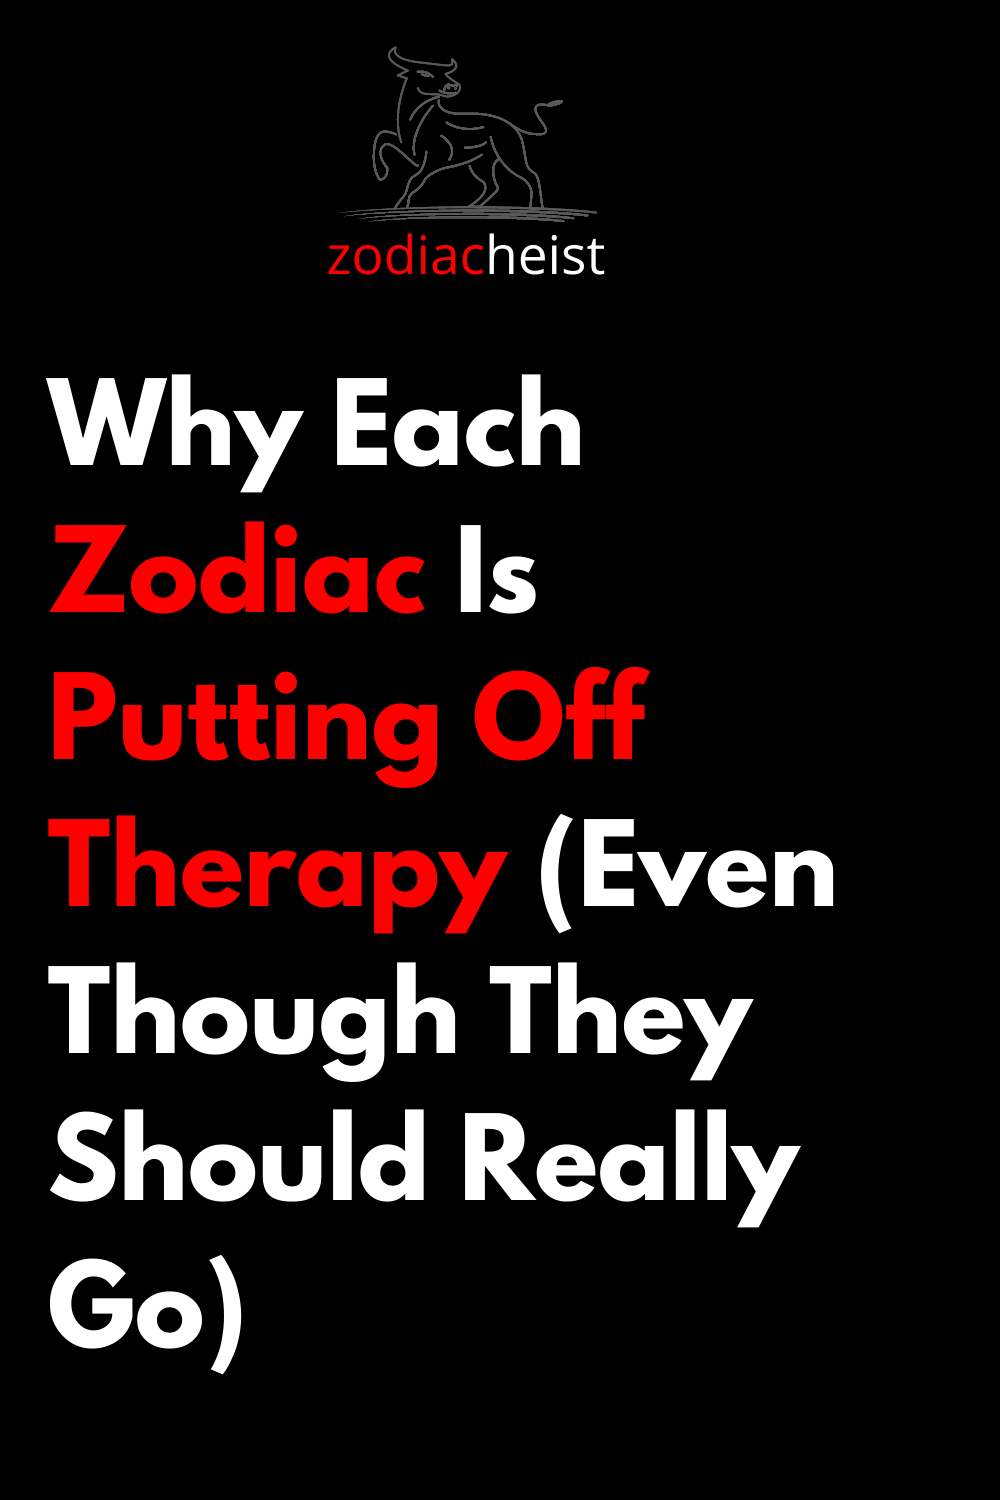 Why Each Zodiac Is Putting Off Therapy (Even Though They Should Really Go)